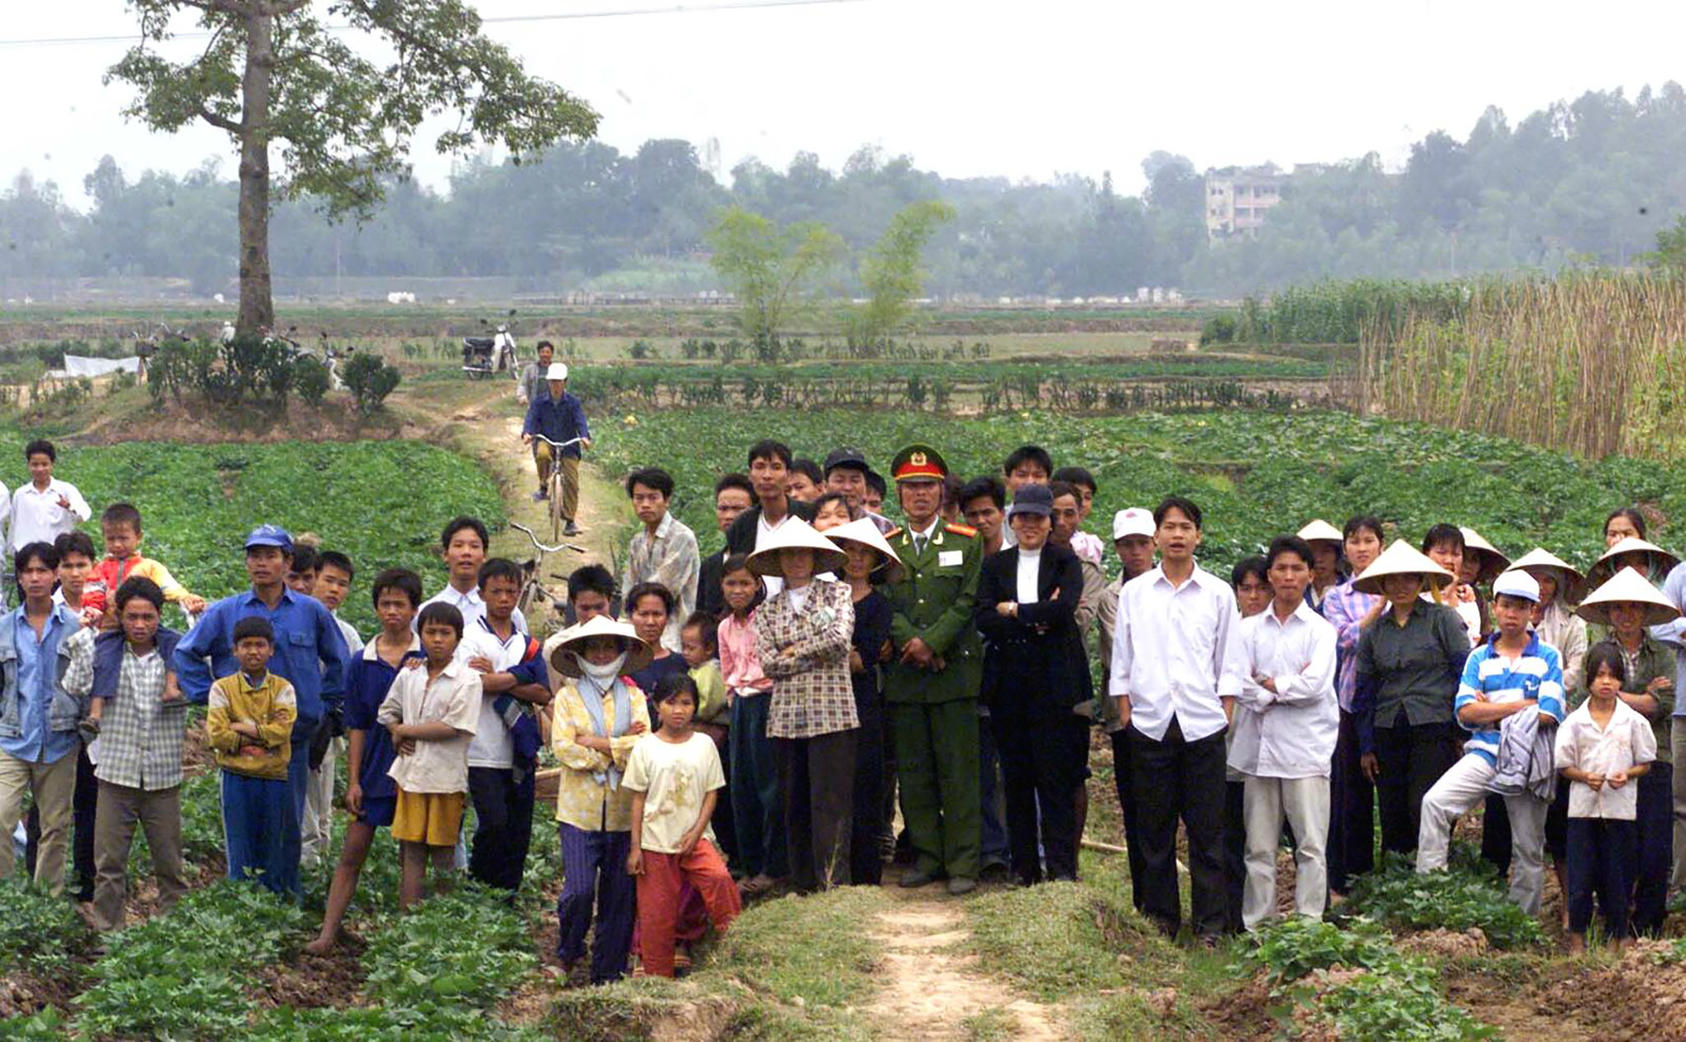 Residents of the village of Tien Chau watch a visit by American and Vietnamese teams searching the area in 2000 for the buried remains of a U.S. pilot shot down in the Vietnam War. (Paul Hosefros/The New York Times)